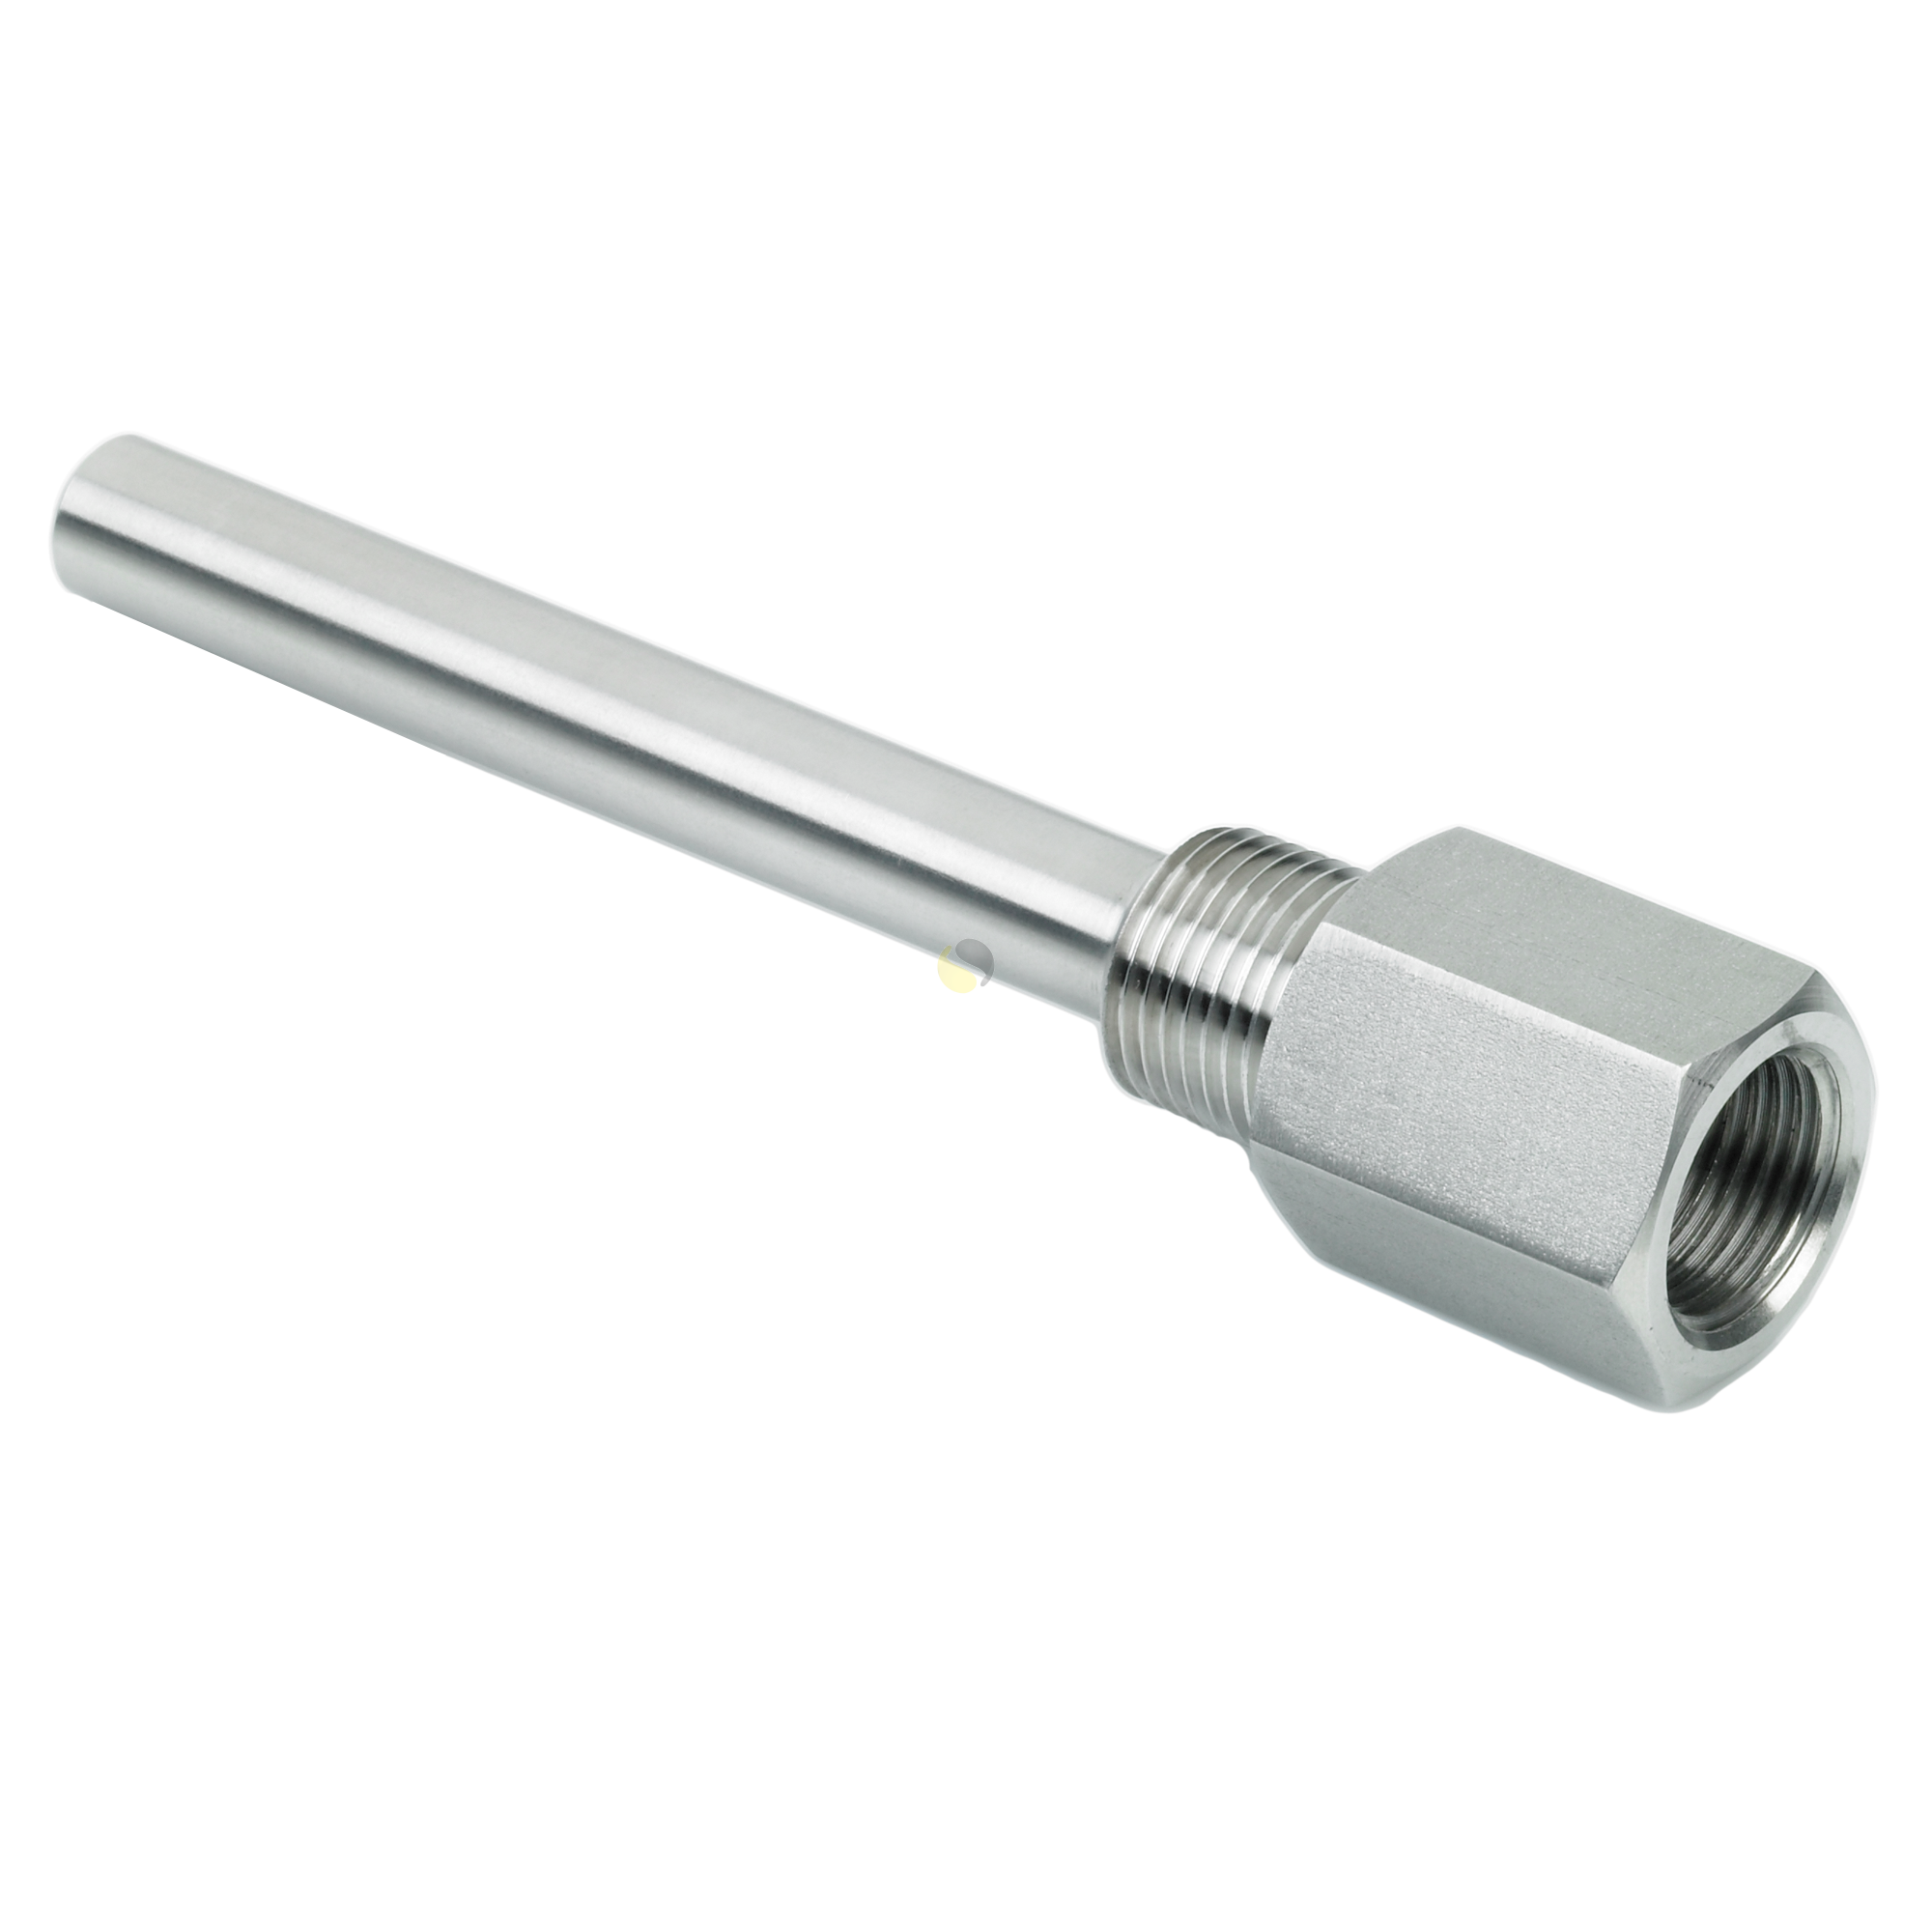 1/2 NPT Threads Stainless Steel Thermowell for Temperature Sensors 